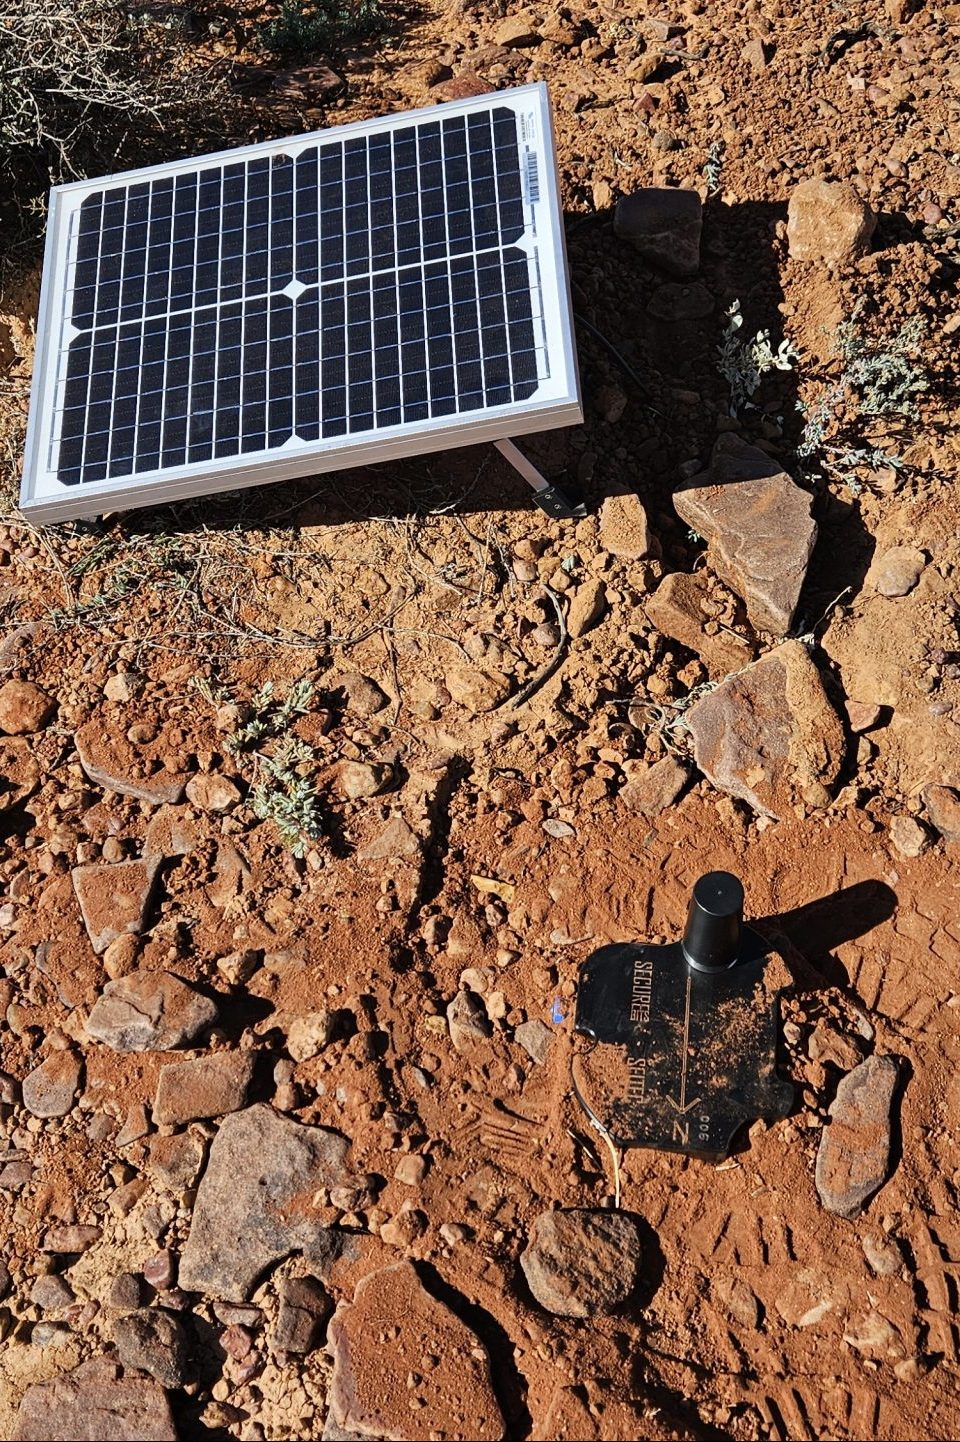 The UXOTrackS prototype and solar panel installed at WTR.